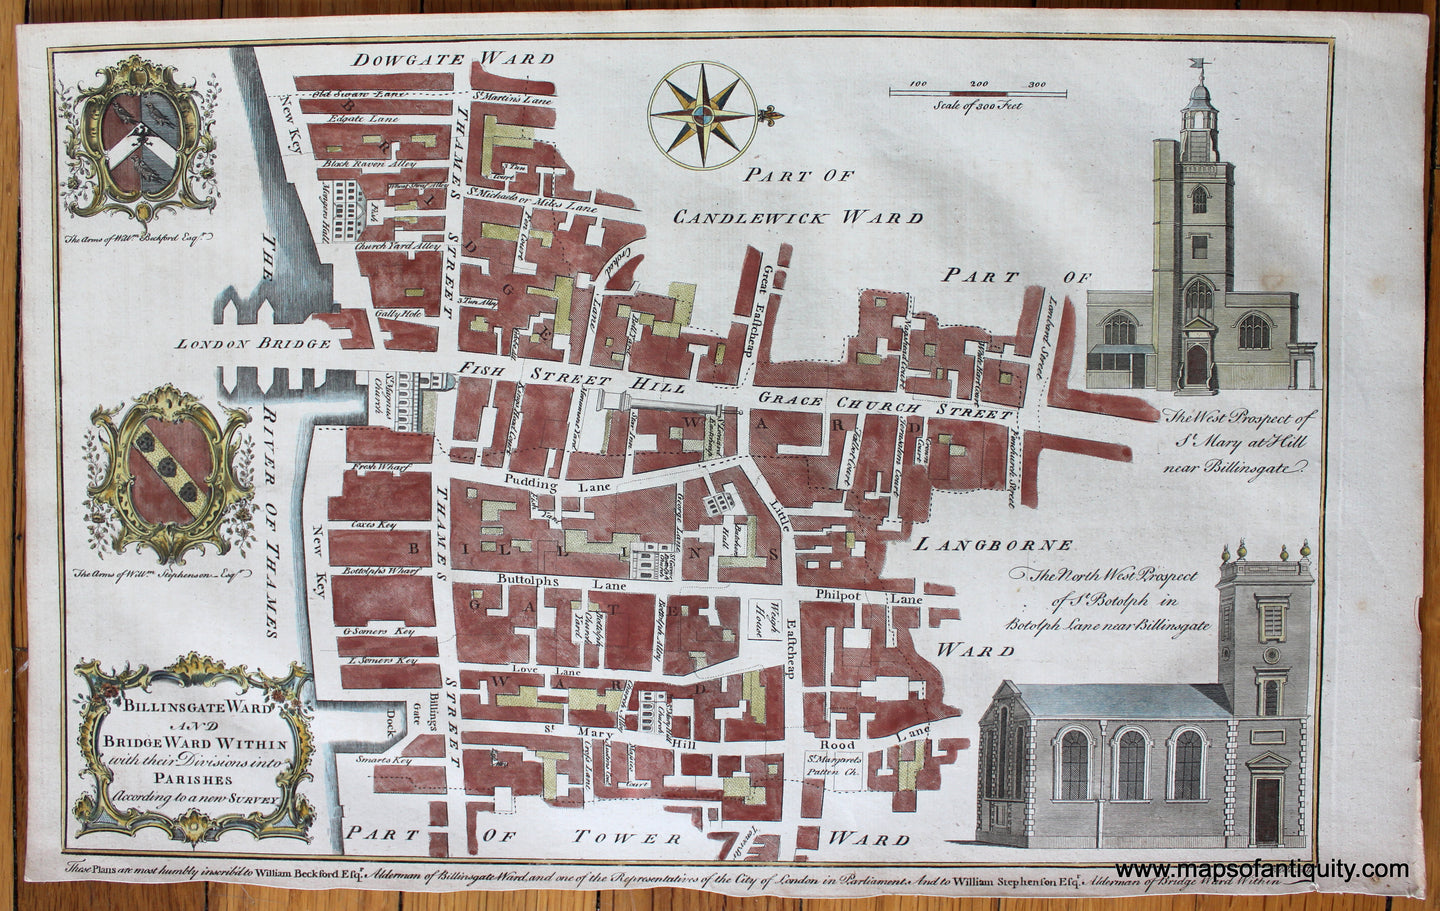 Antique-Map-London-England-Maitland-Cole-Billinsgate-Ward-and-Bridge-Wards-William-Calvert-1756-1750s-1700s-Early-Mid-18th-Century-Maps-of-Antiquity